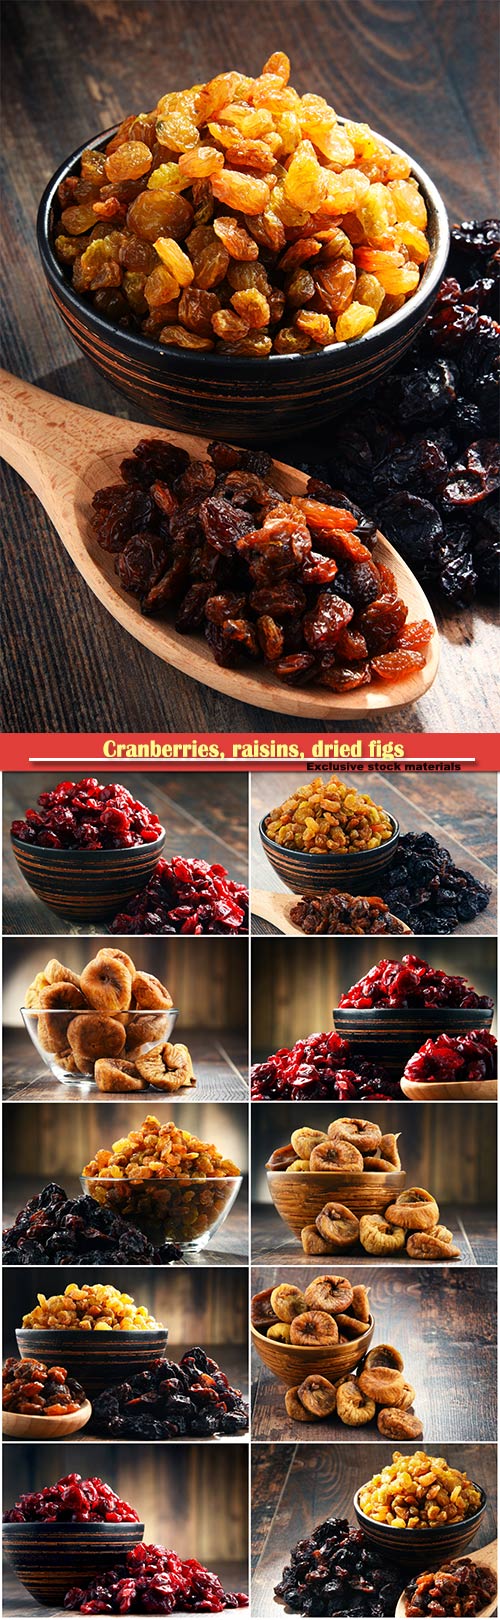 Composition with bowl of dried cranberries, raisins, dried figs